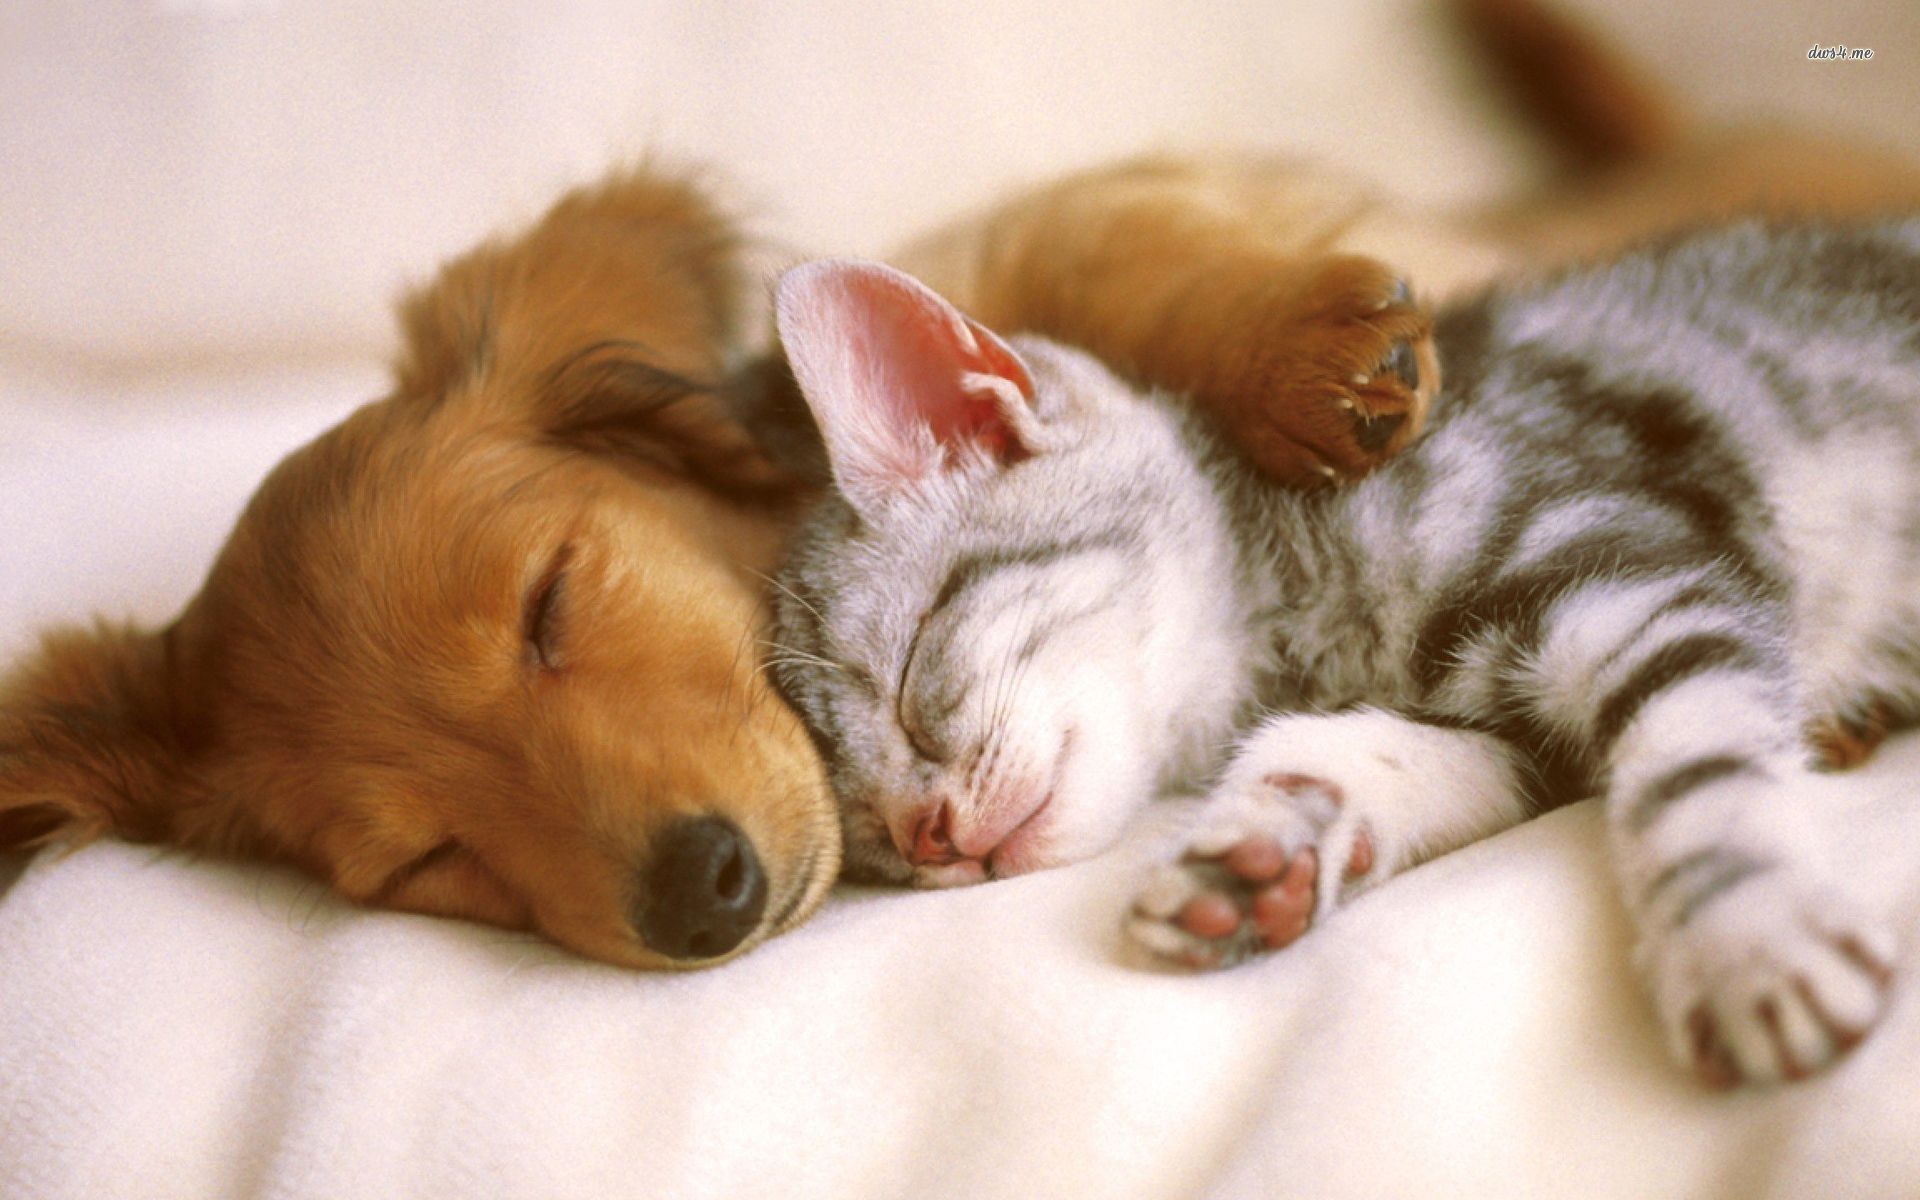 Cute Baby Puppies and Kittens Sleeping id: 4186